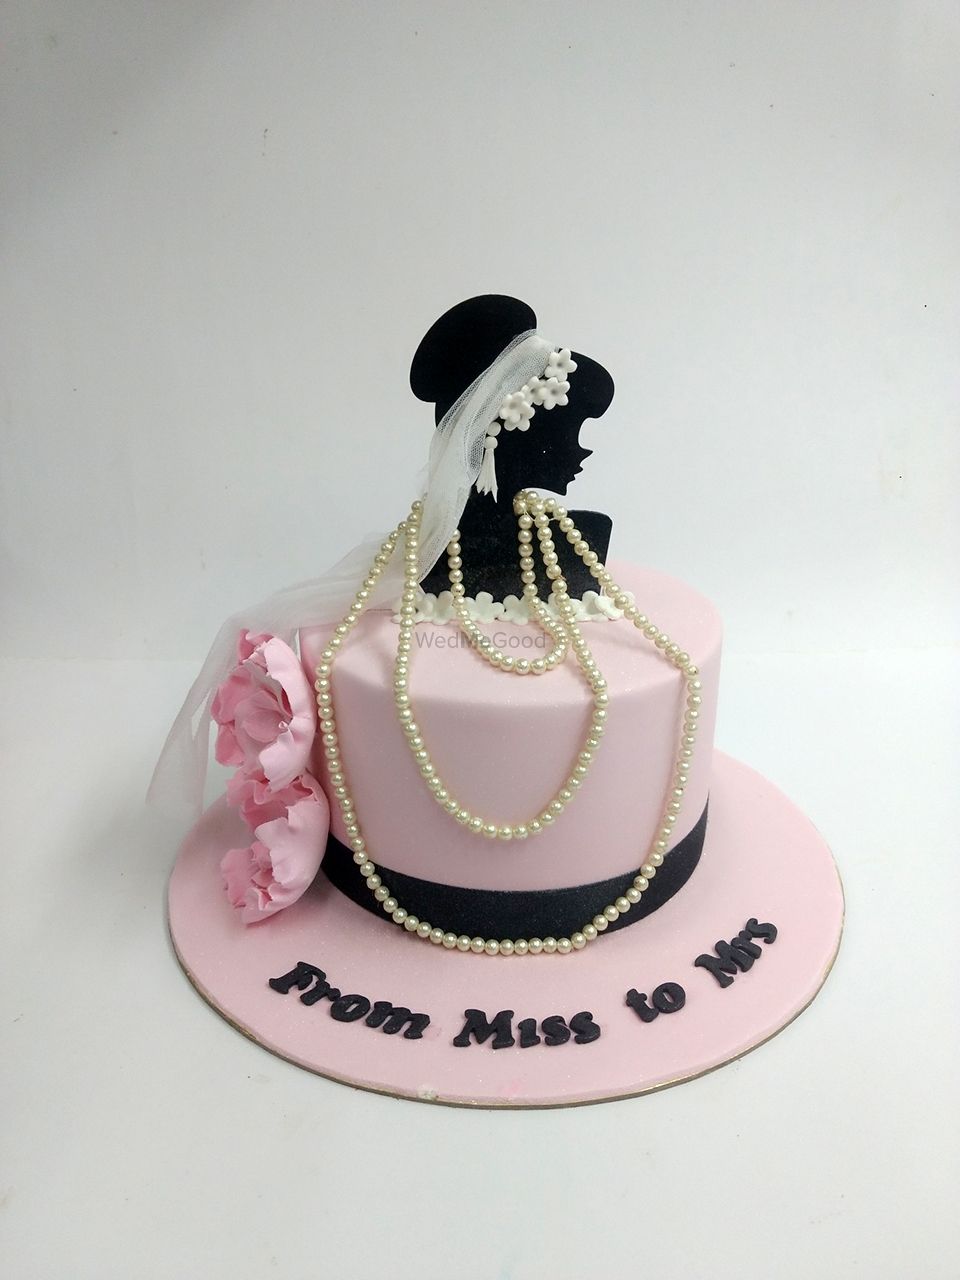 Photo From Wedding Cakes - By Magdalena Designer Cakes And More